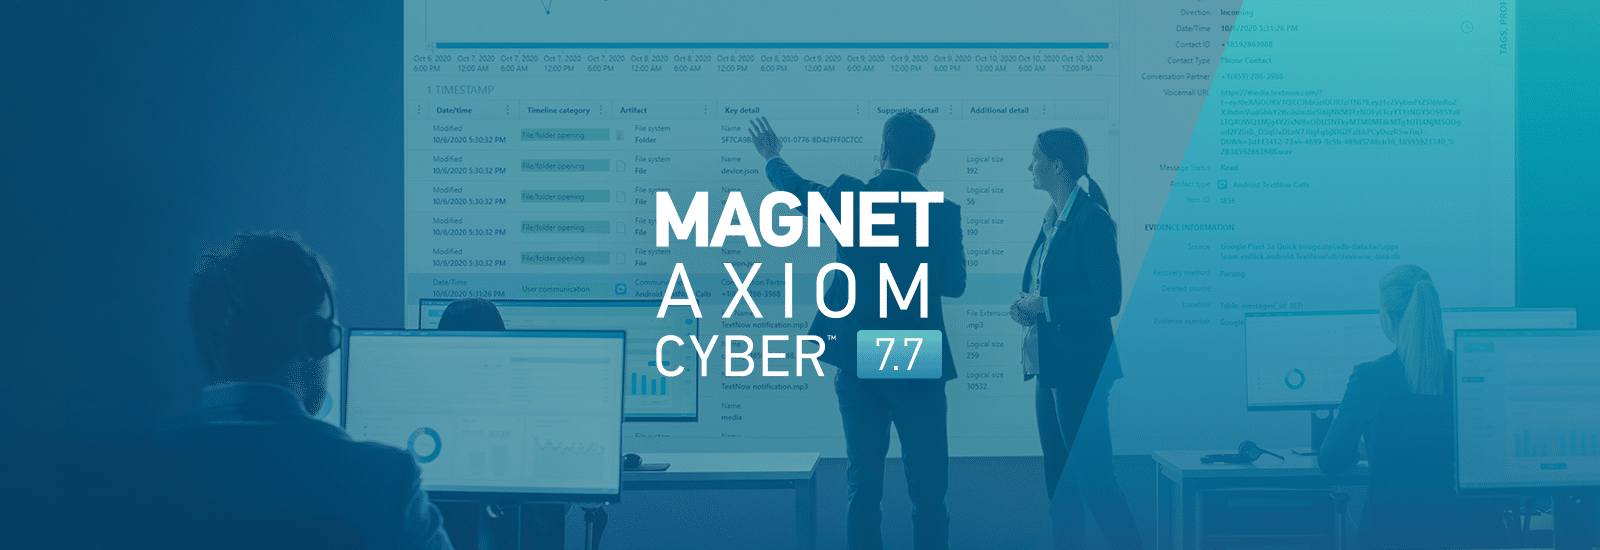 A decorative header for the Magnet AXIOM Cyber 7.7 release.